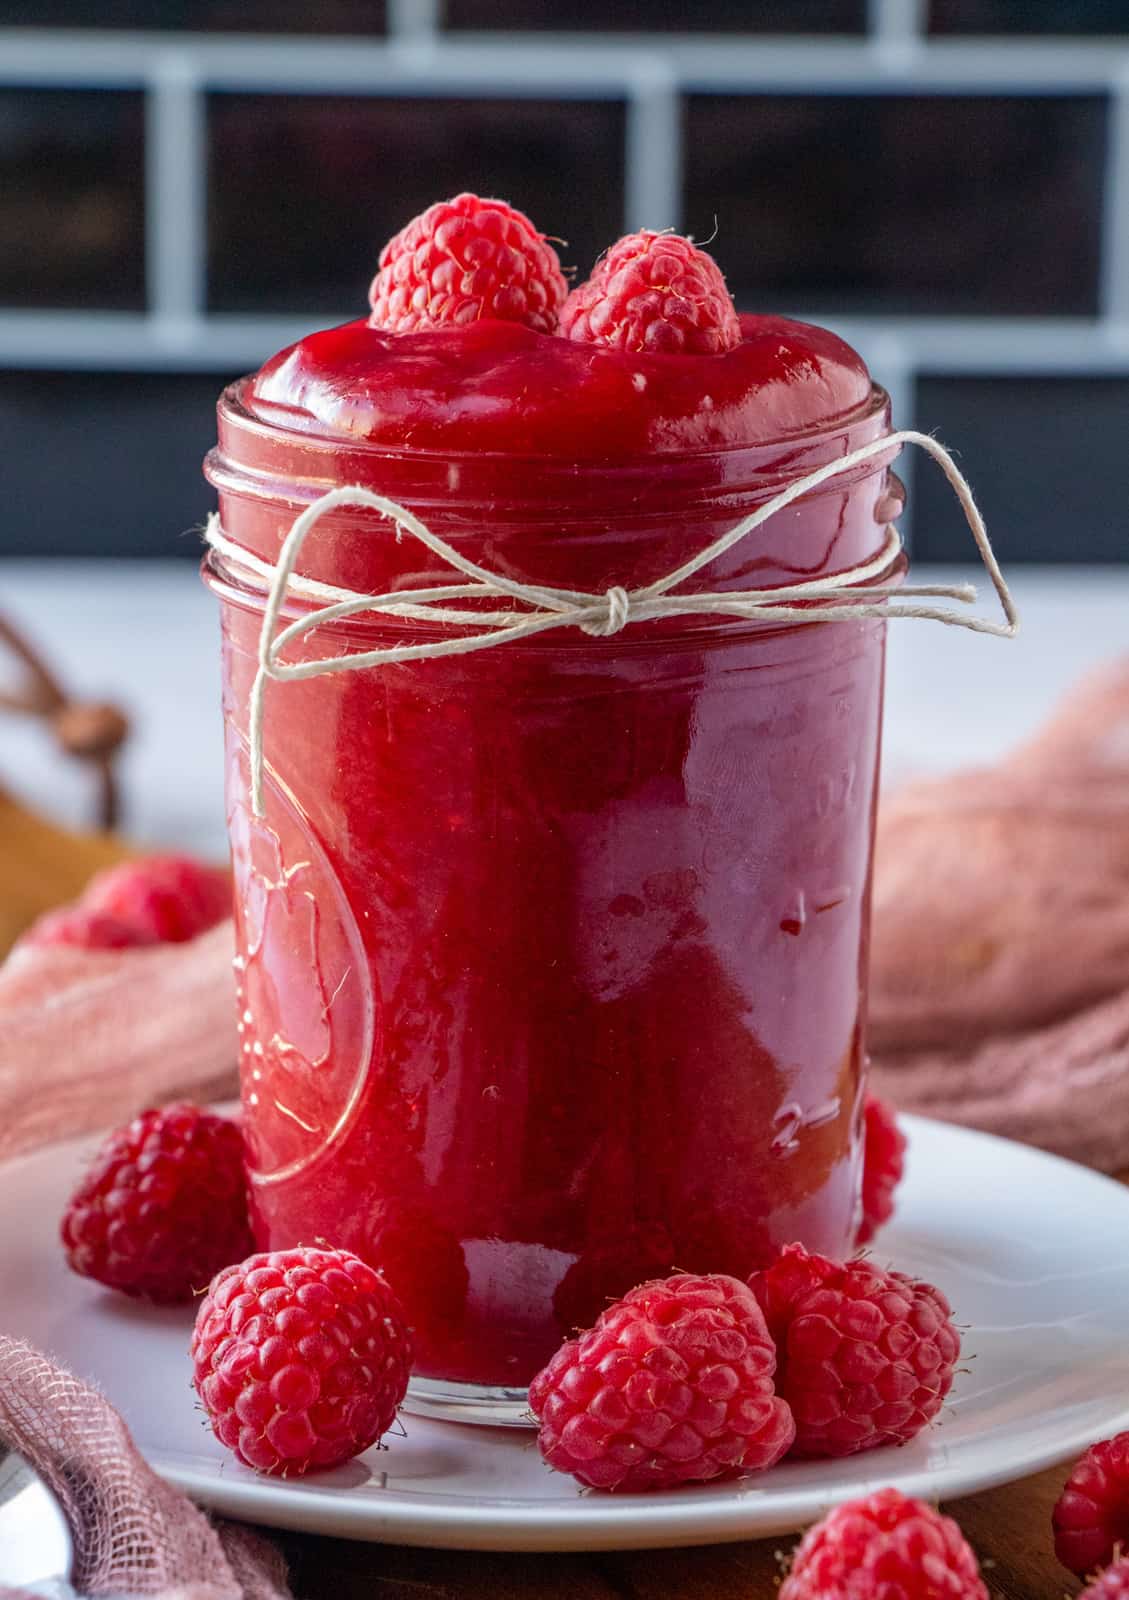 white plate with jar full of sauce surrounded by raspberries